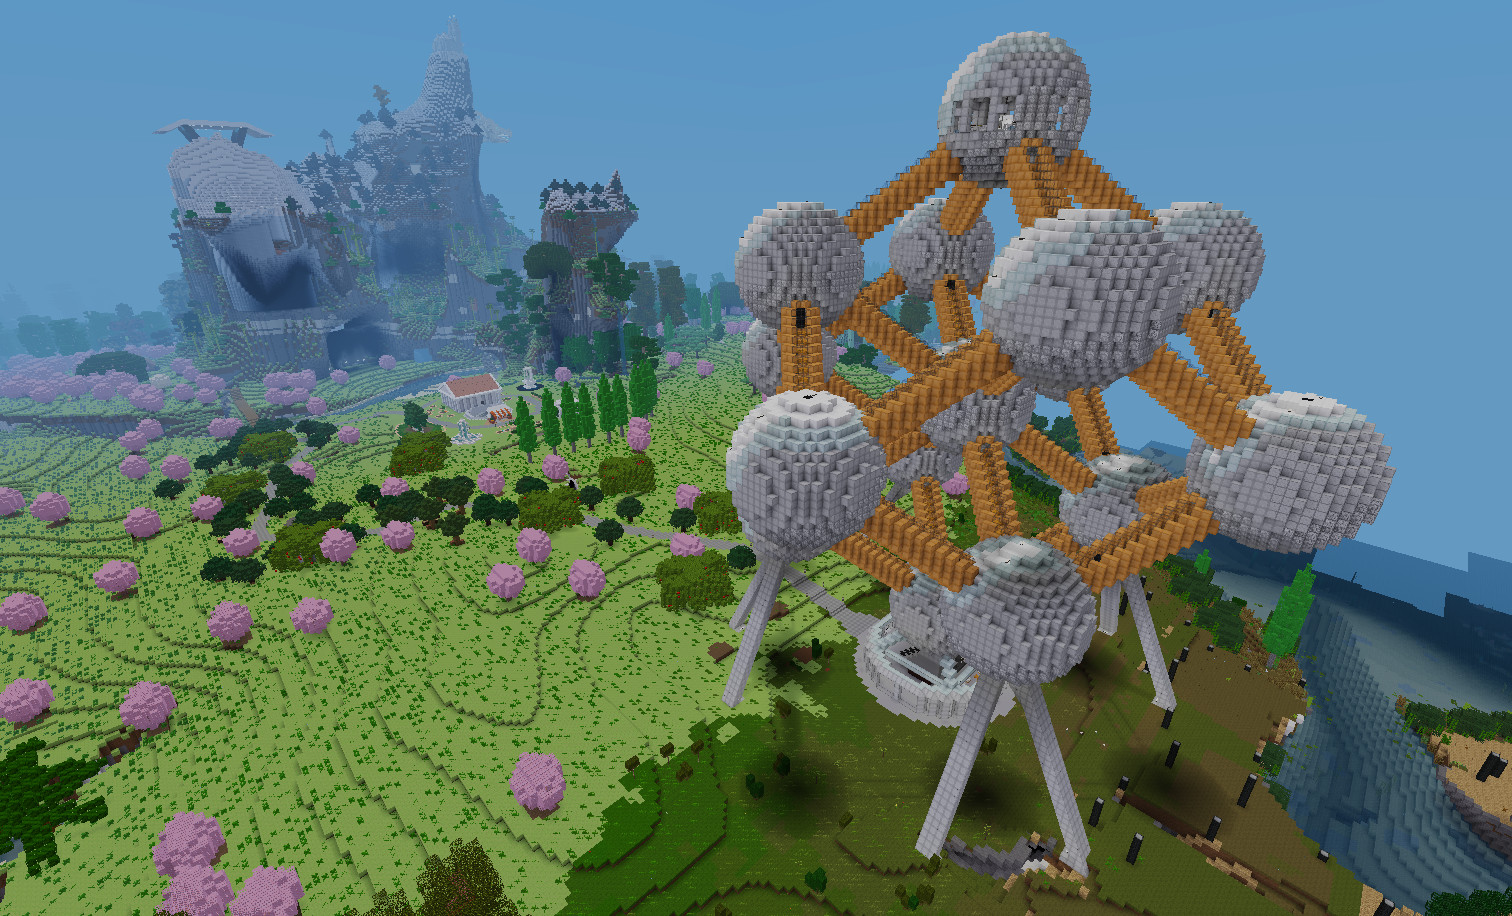 <a target='_blank' href='https://map.wunderwelt.one/#!/map/0/12/8668/4801'>Atomium</a> (built by dotti)